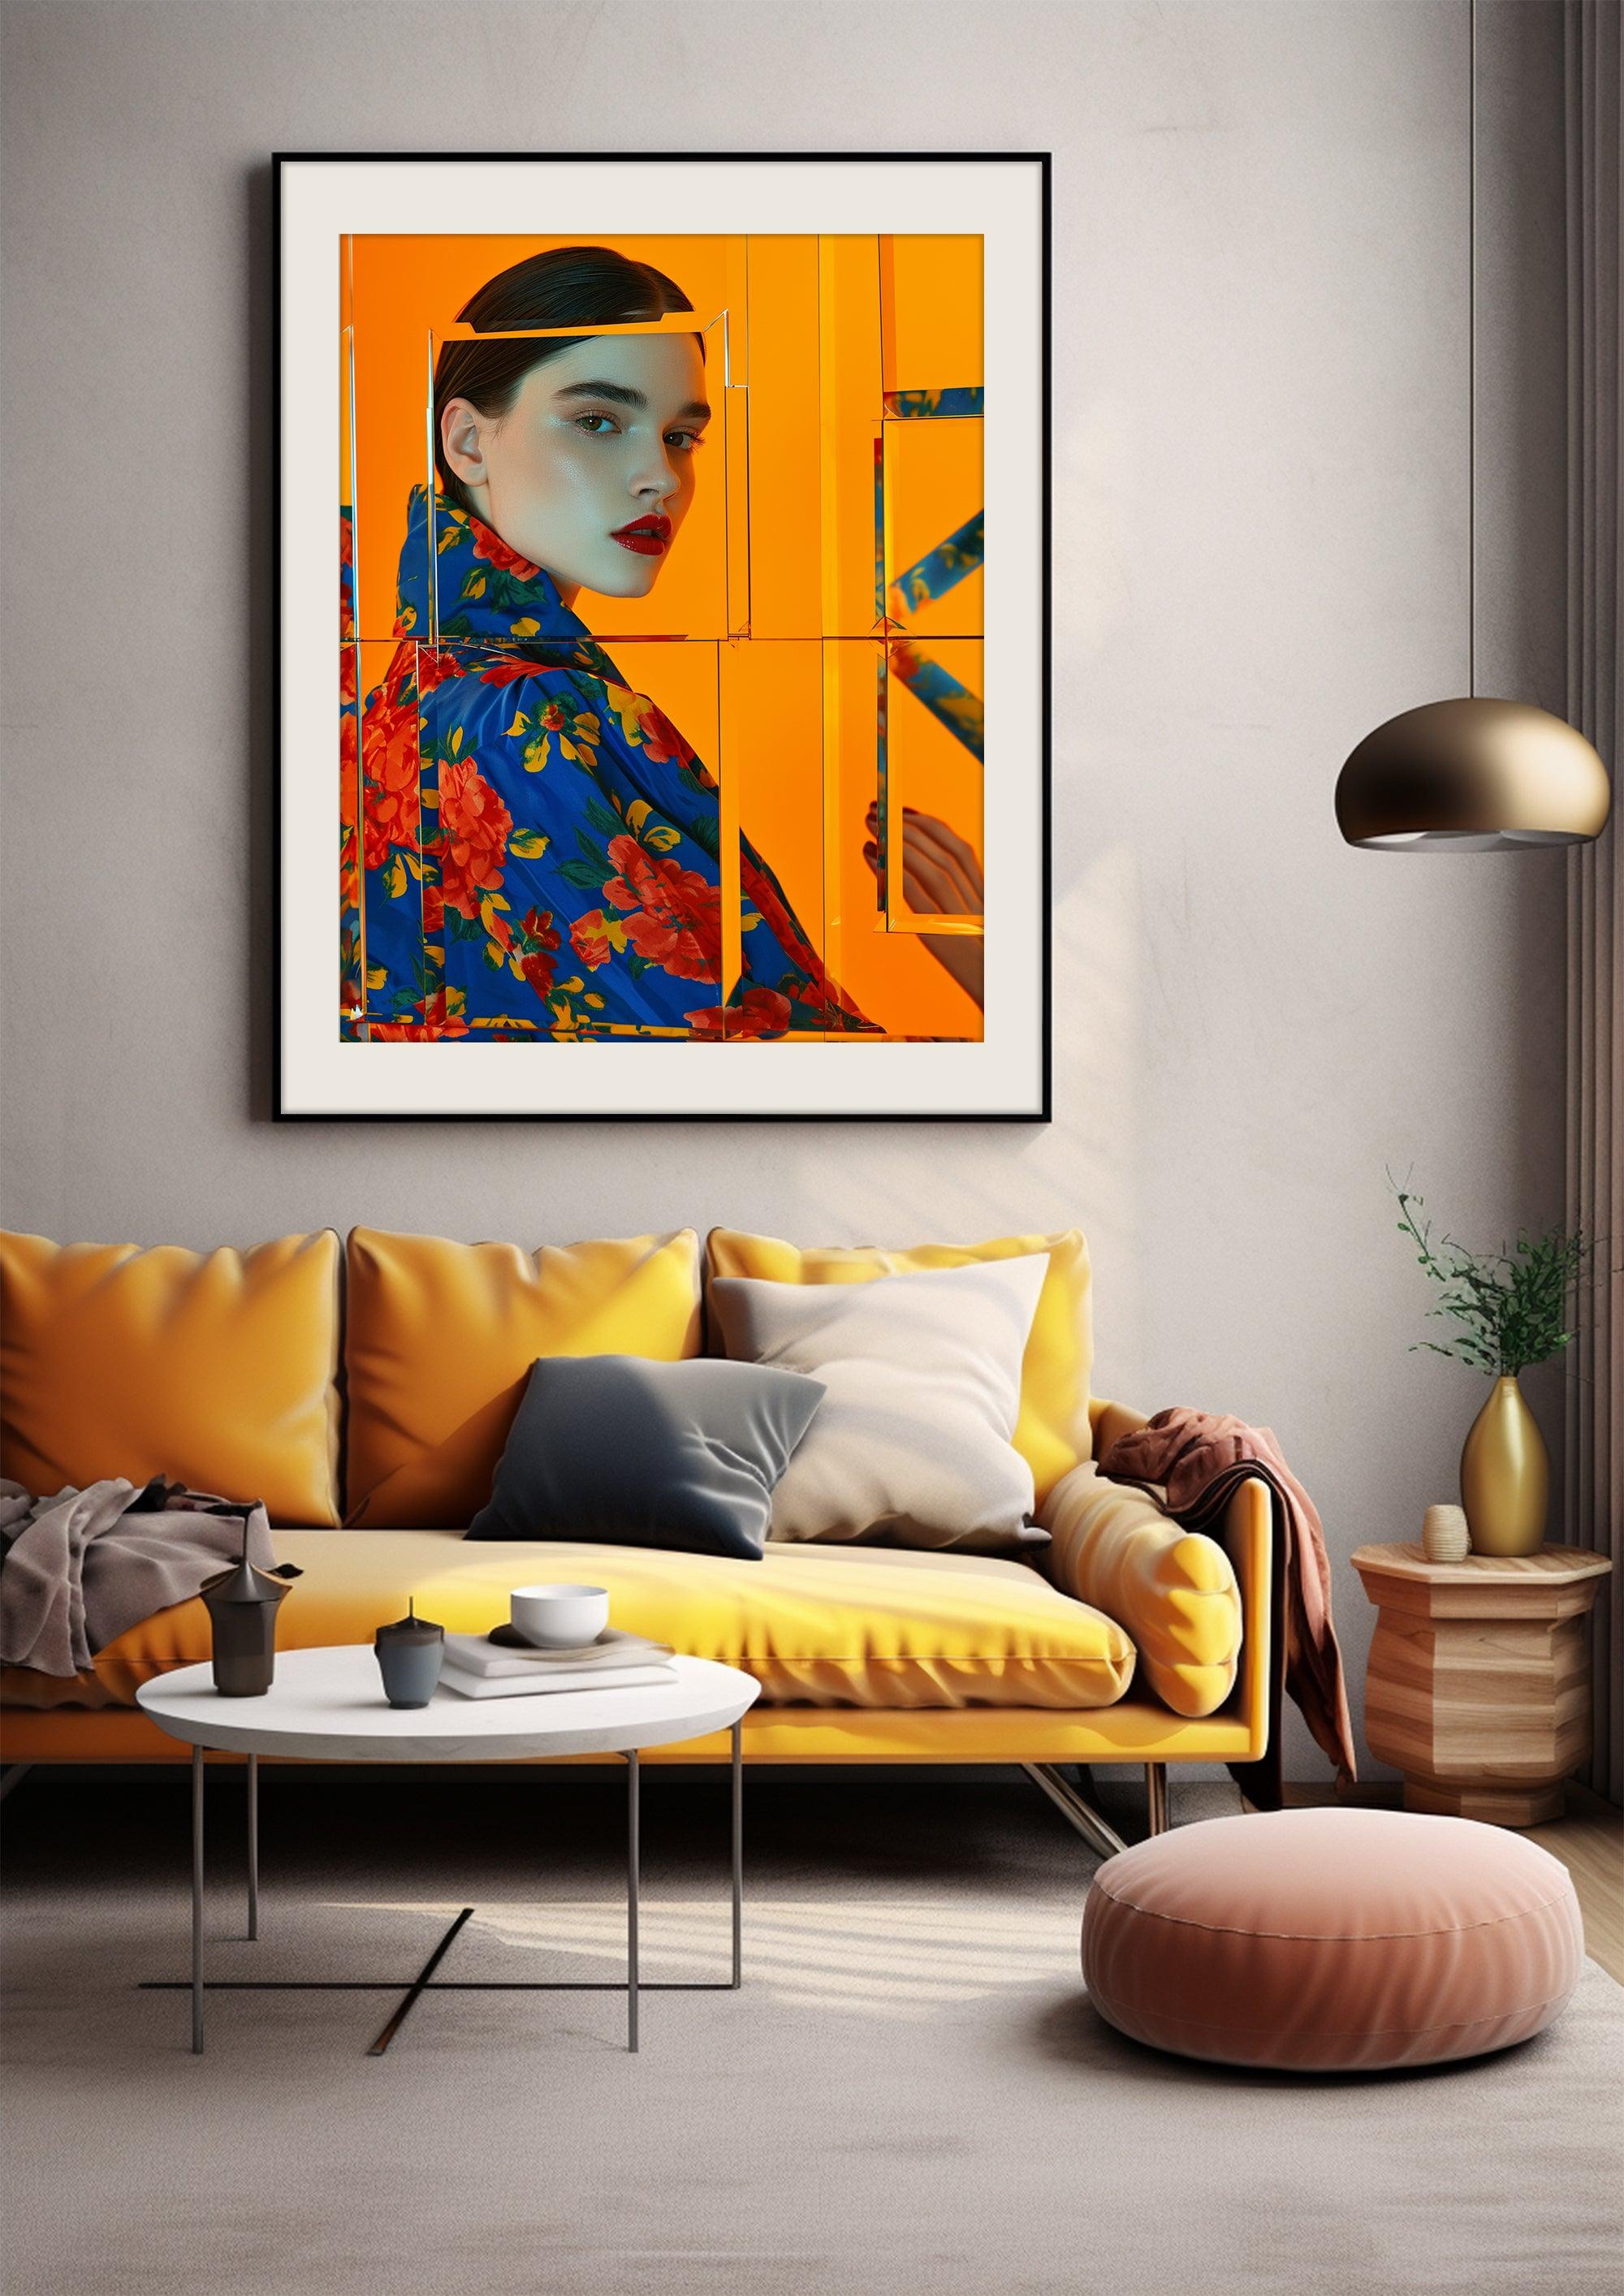 Vogue Allure: Chic Fashion Poster - Gallery-Quality Prints for Stylish Spaces，Digital Download